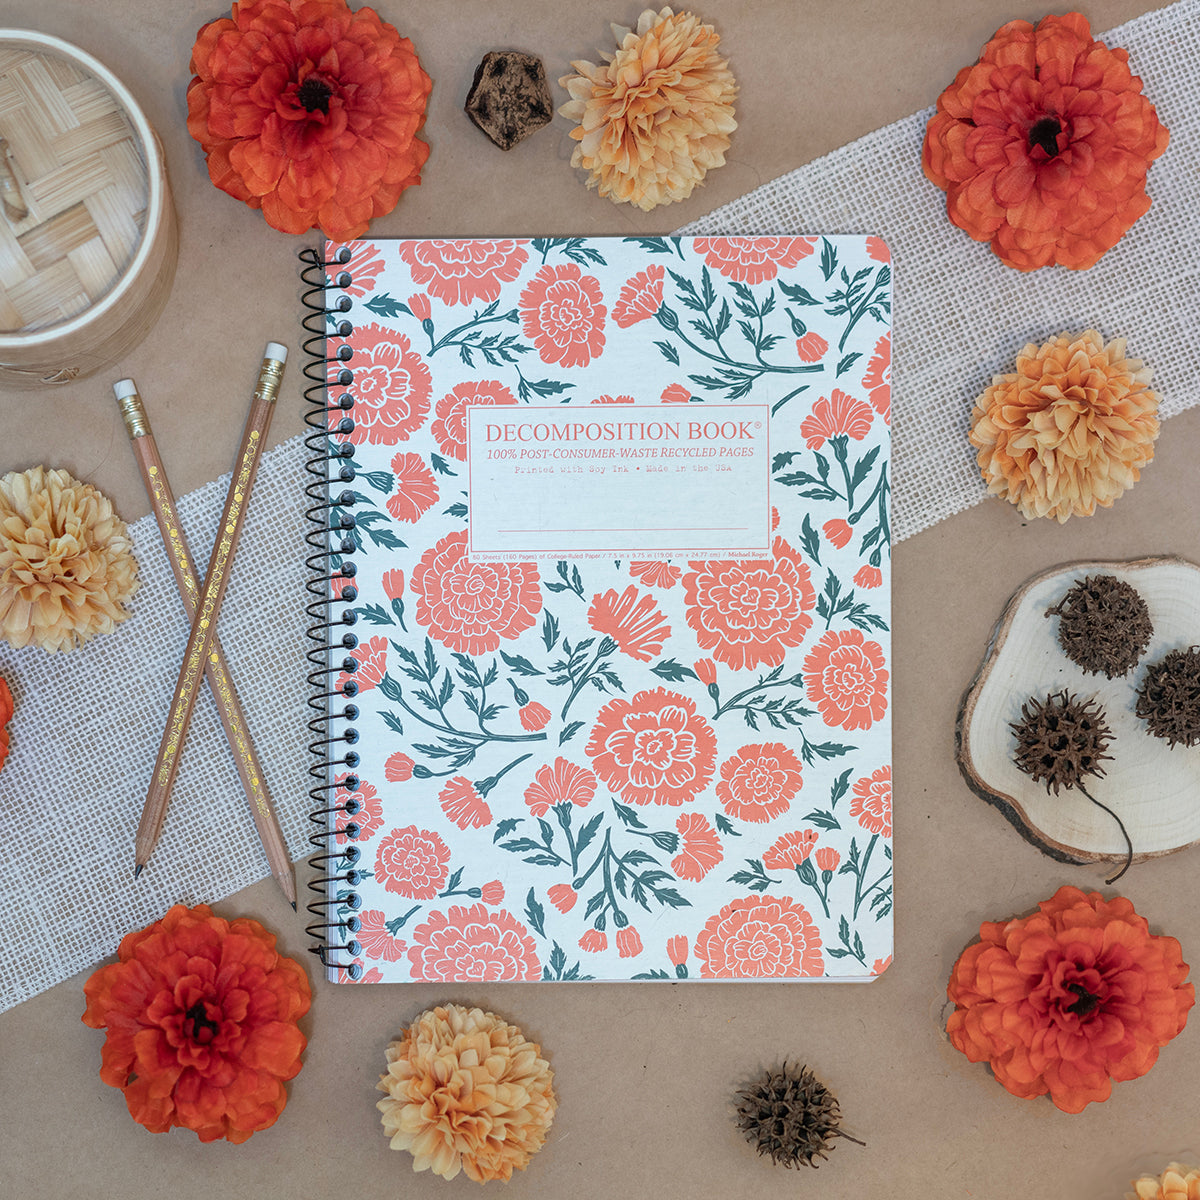 Spiral notebook printed with a pattern of large flowers in orange and green